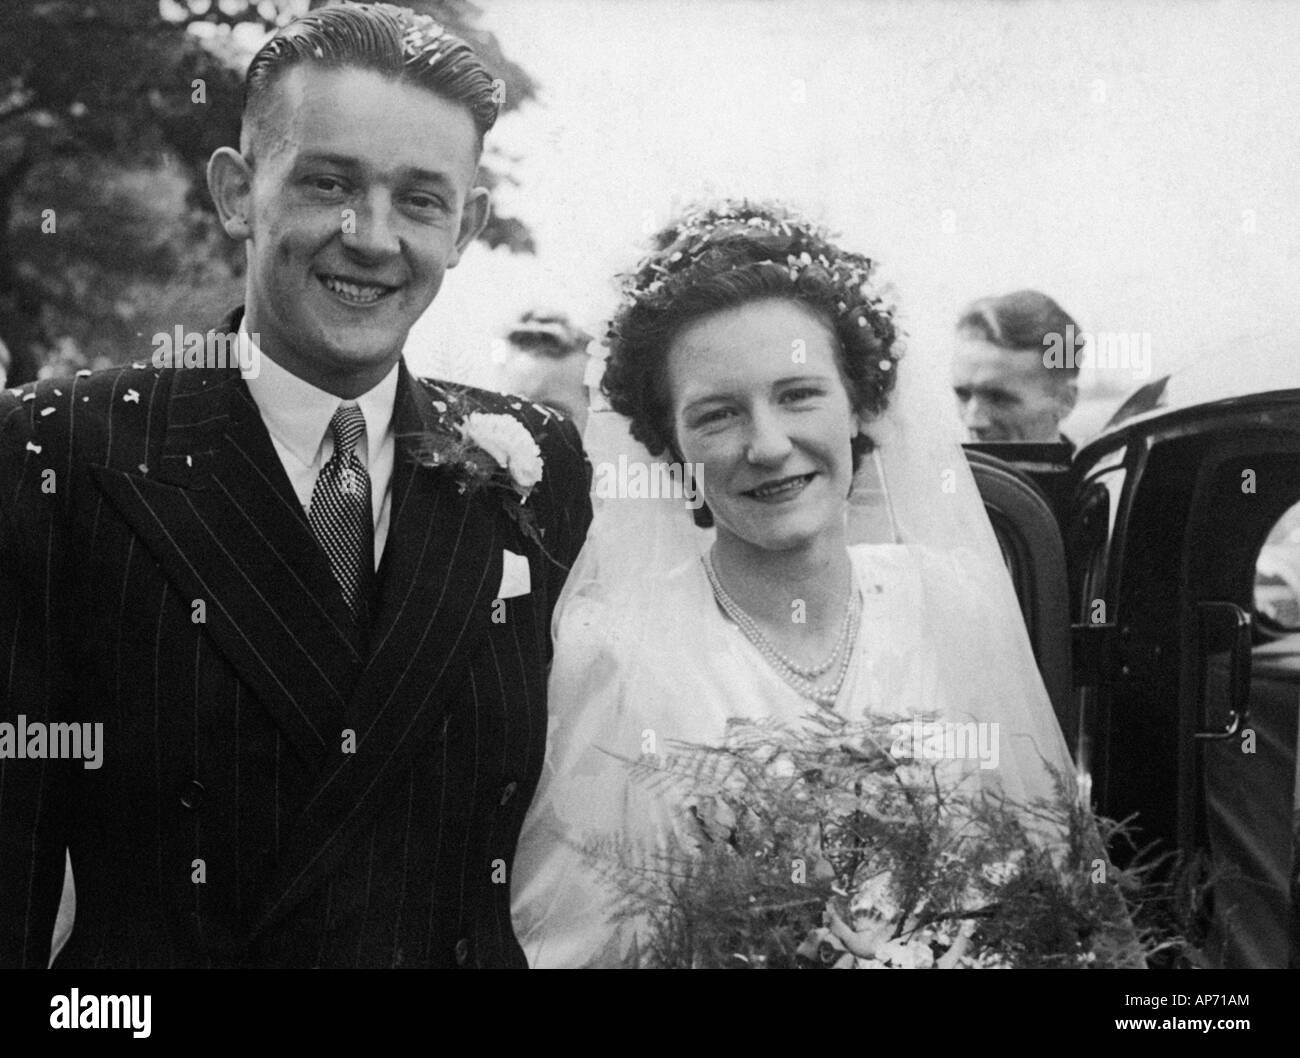 OLD BLACK AND WHITE FAMILY PORTRAIT SNAP SHOT OF BRIDE AND GROOM ON ...